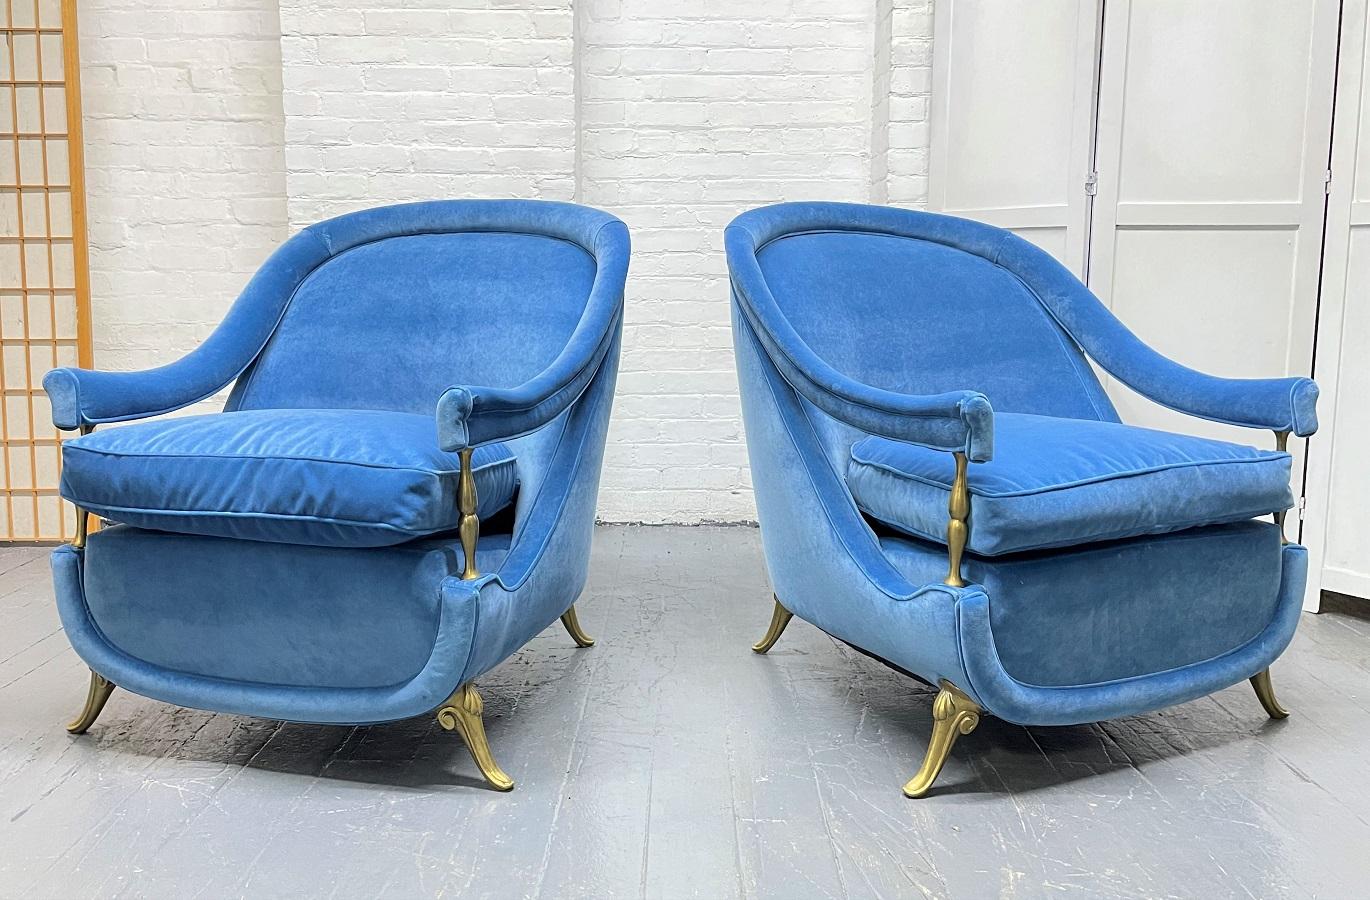 Pair of French 1950s brass and velvet lounge chairs. The chairs have blue velvet upholstery, arched backs, sloping arms, loose cushioned seats with brass feet.